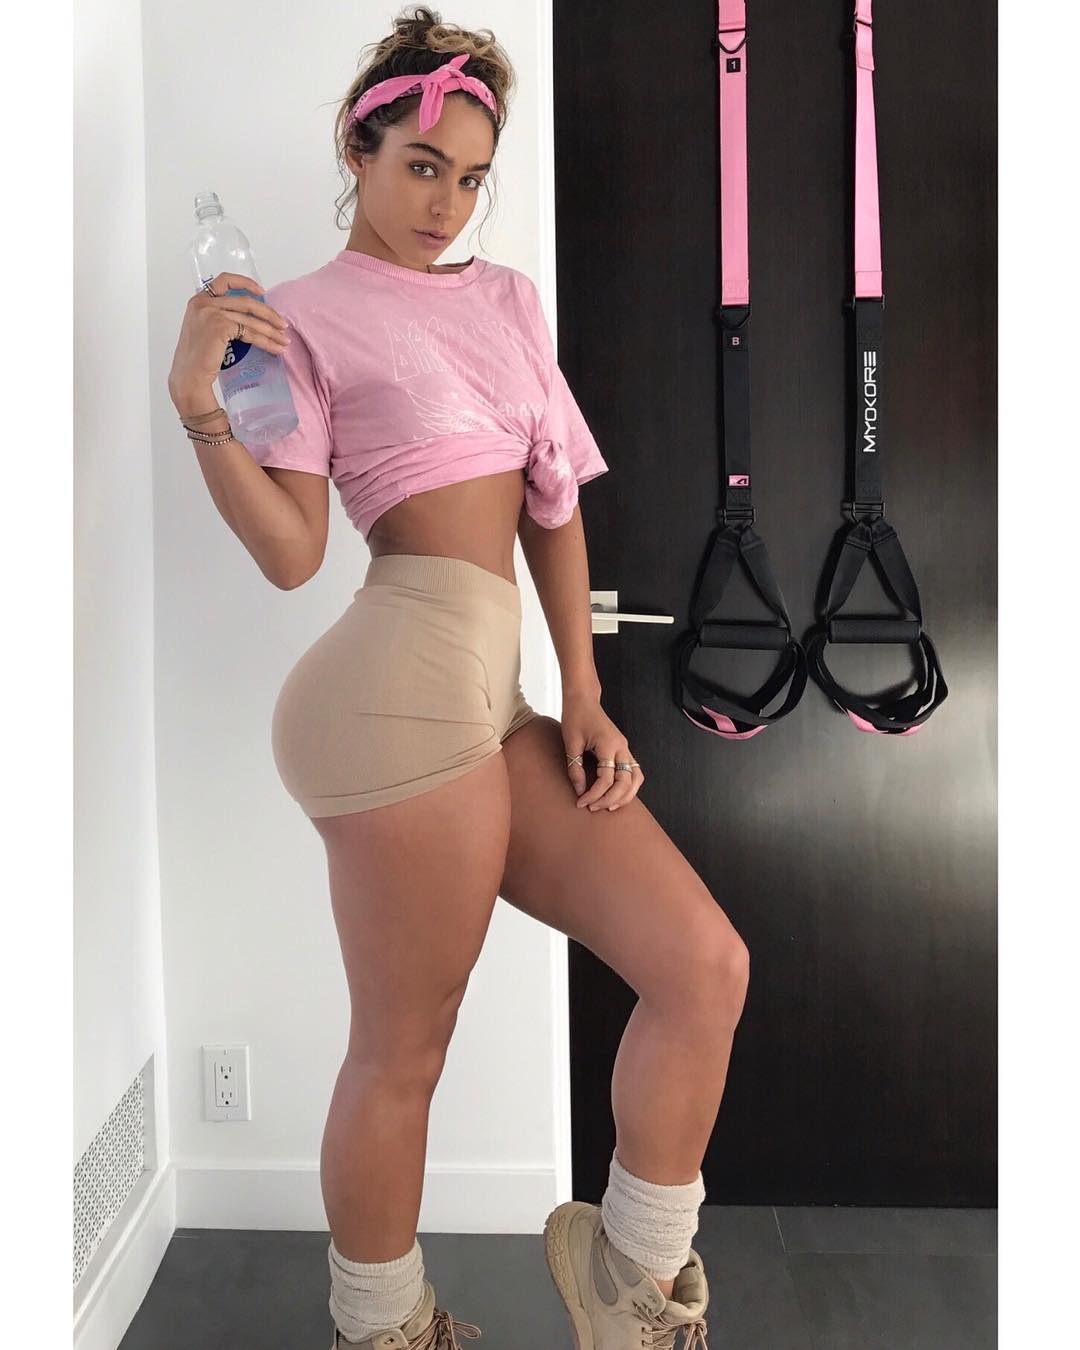 Sommer ray sexy
 #79594629